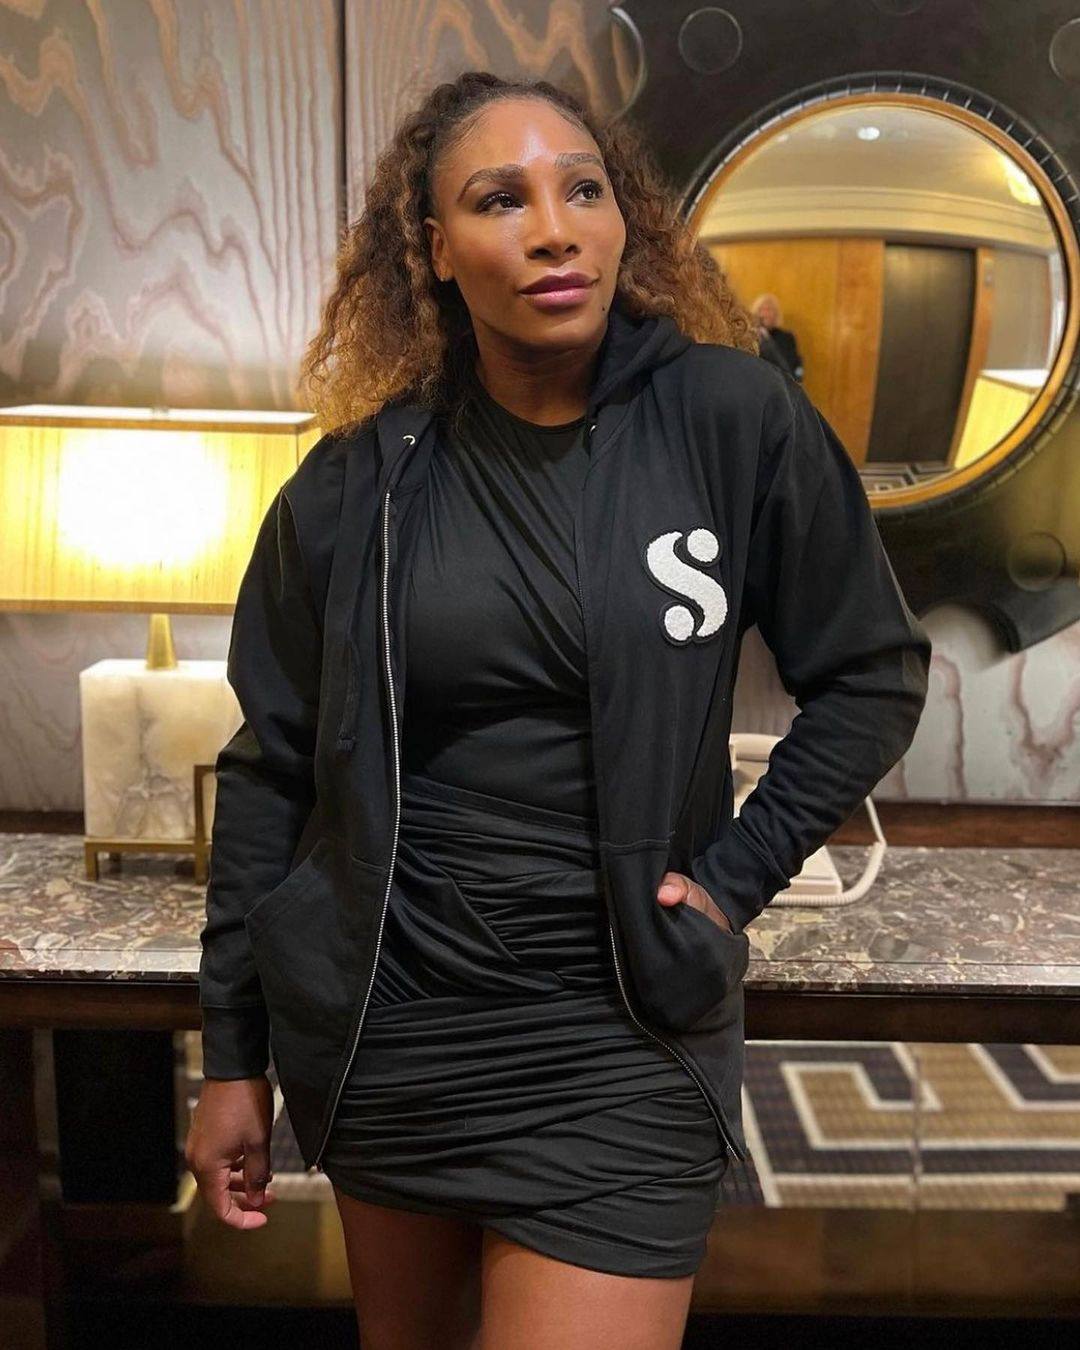 Williams in a performance wear outfit from S by Serena. Photo: Instagram